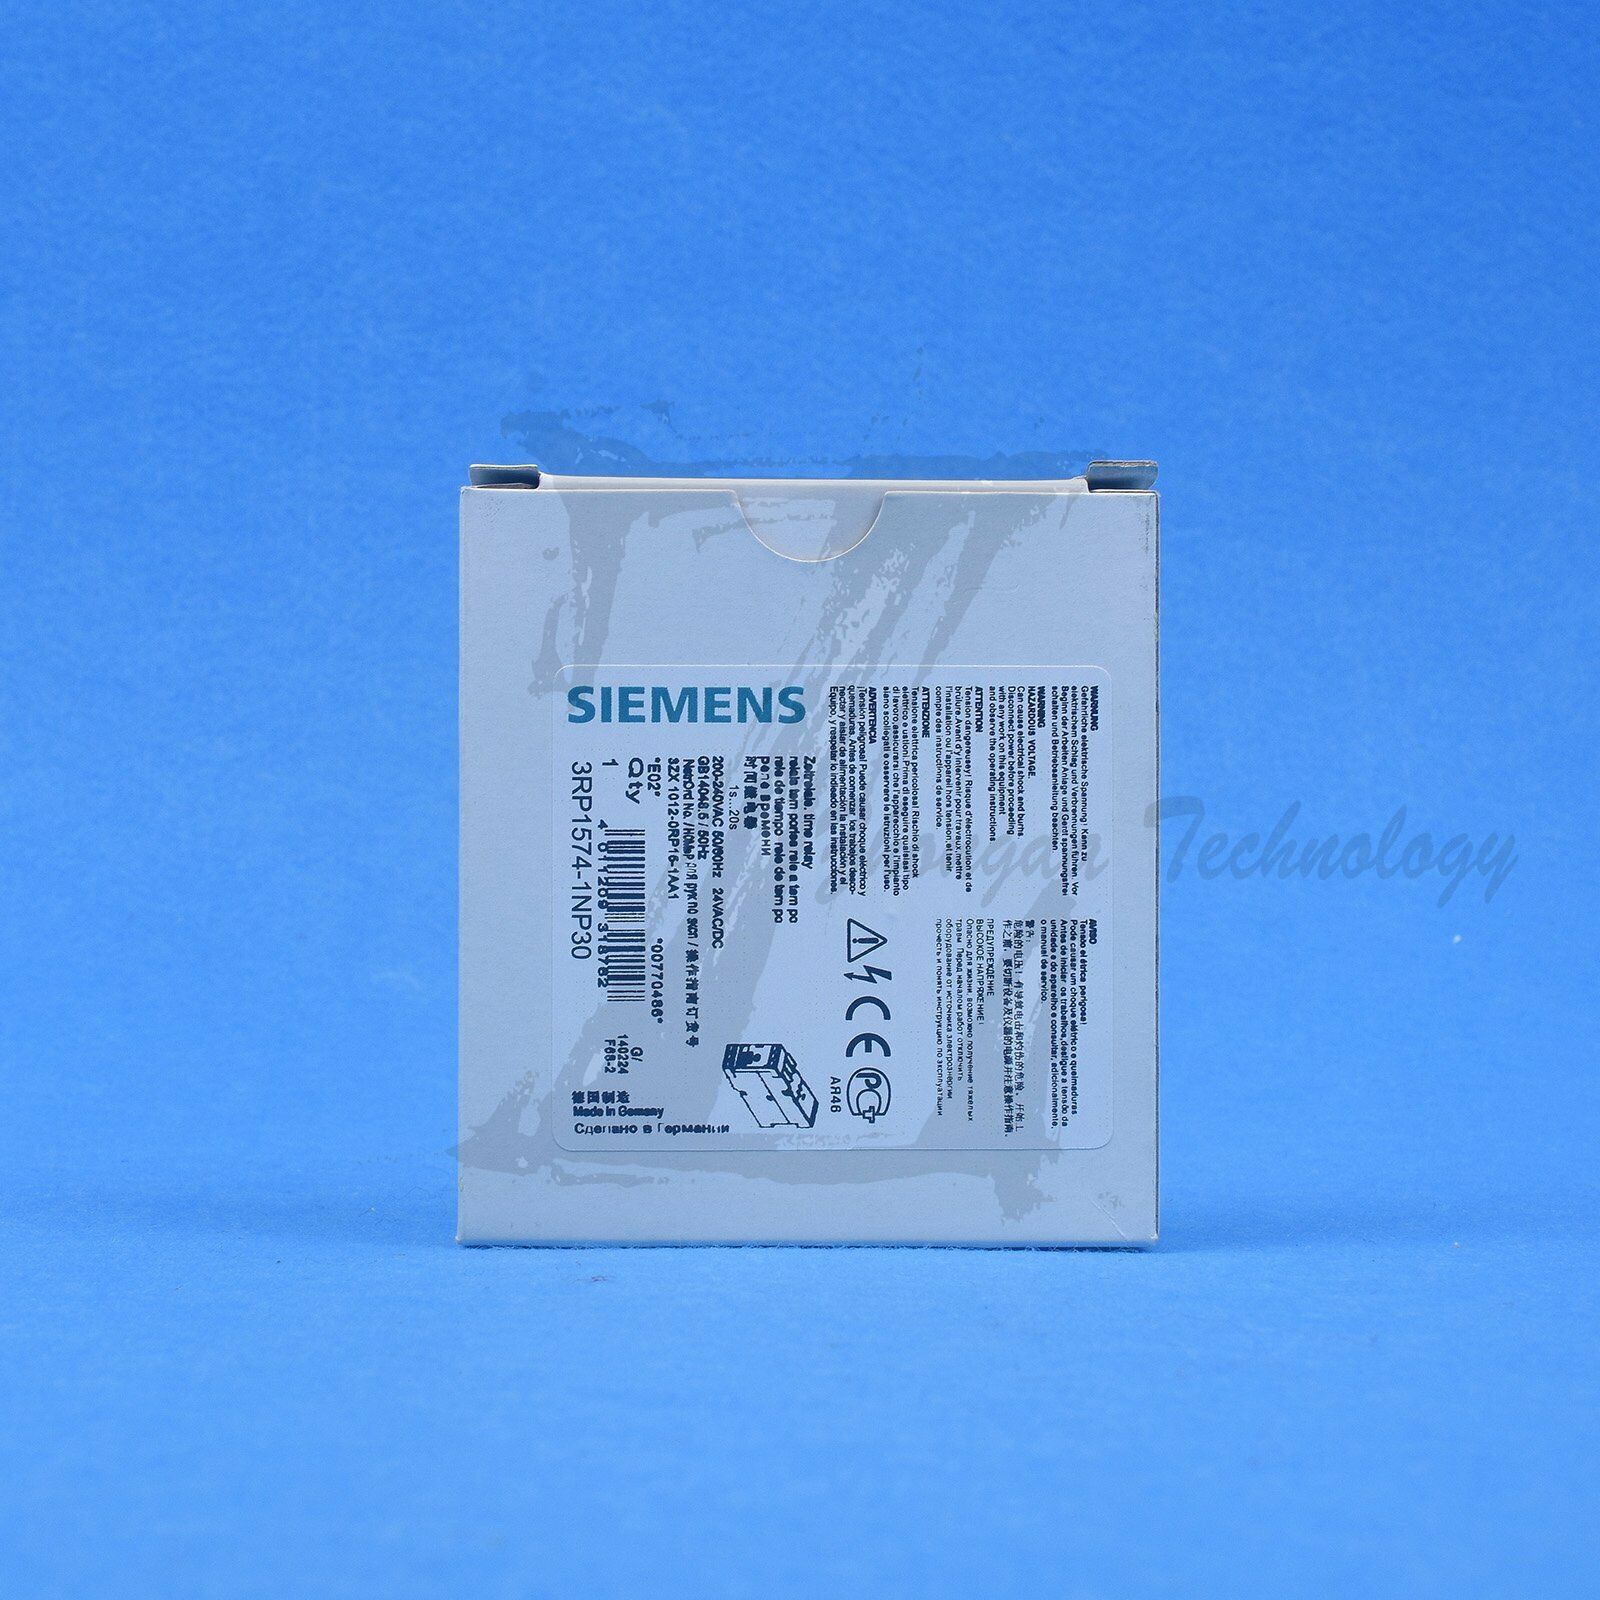 1PC New in box Siemens Relay 3RP1574-1NP30 One year warranty 3RP15741NP30 KOEED 101-200, 90%, import_2020_10_10_031751, Other, Siemens